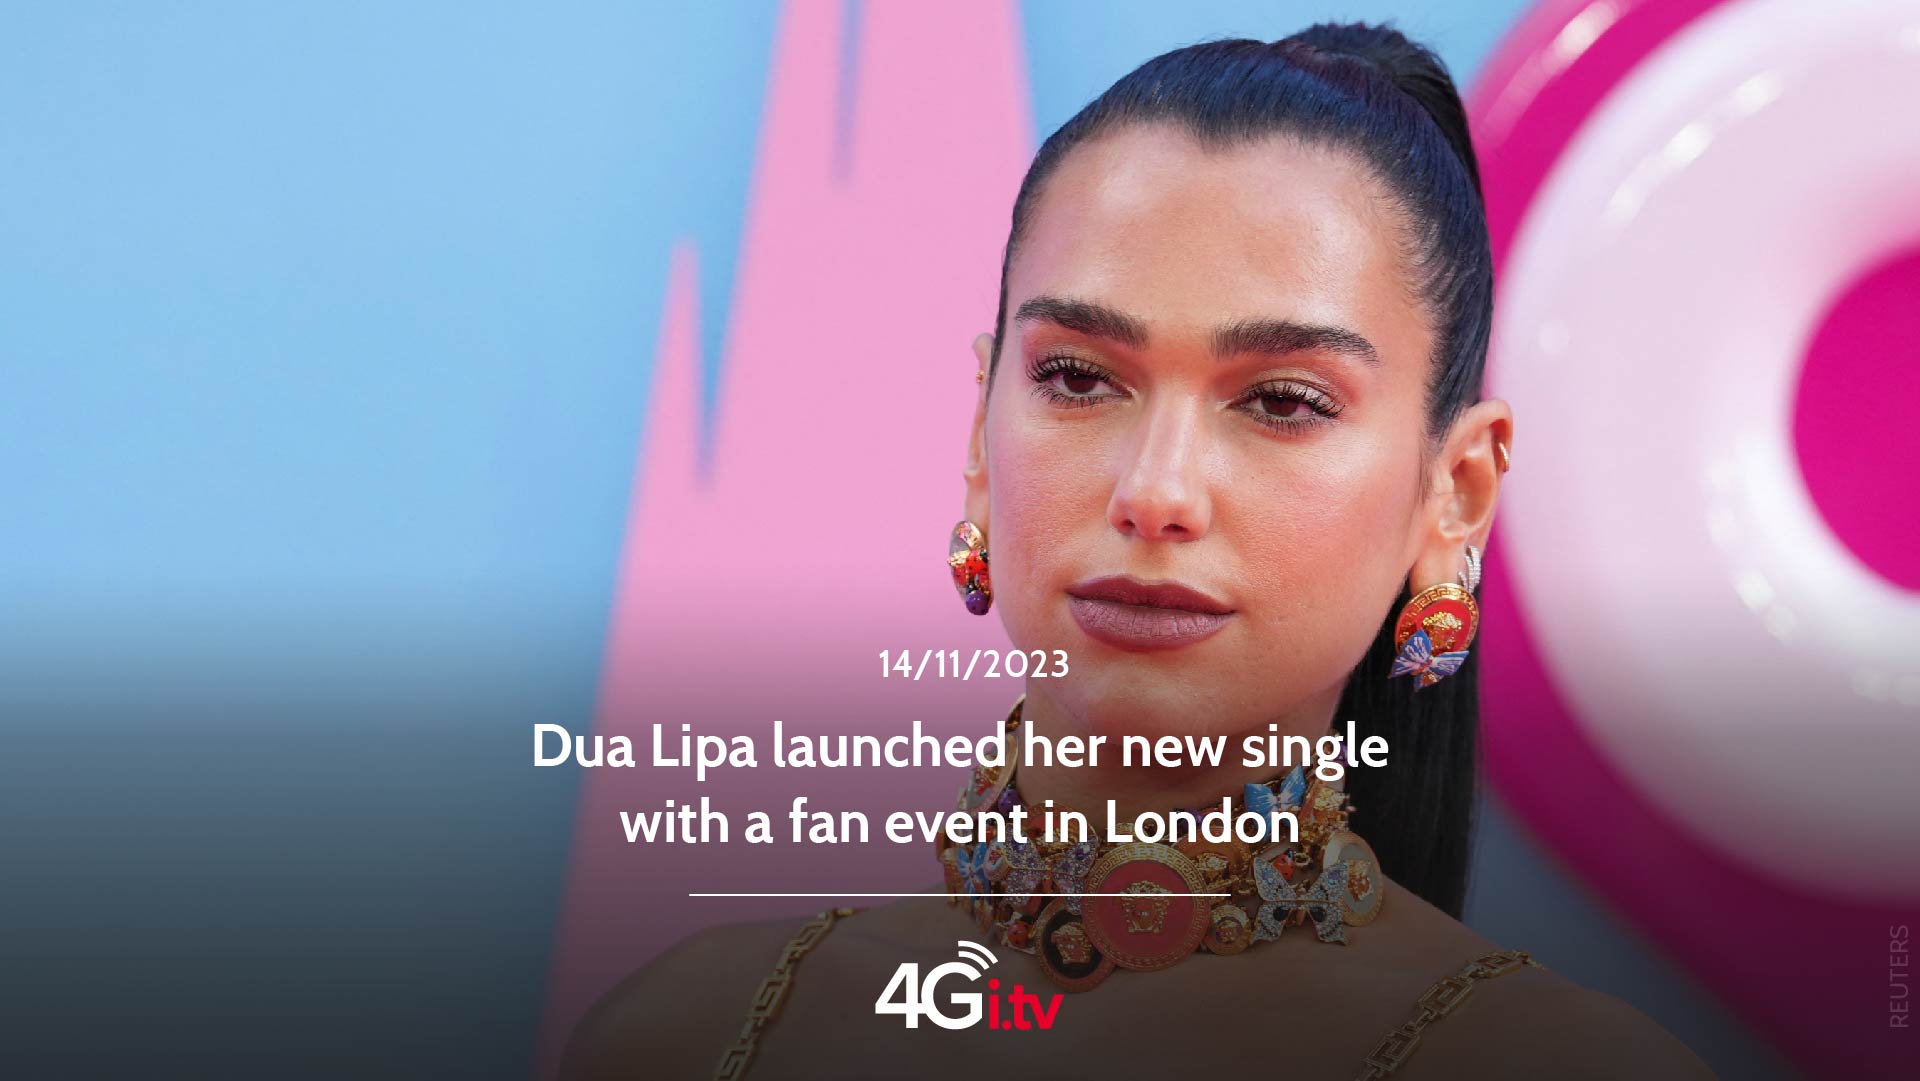 Lesen Sie mehr über den Artikel Dua Lipa launched her new single with a fan event in London